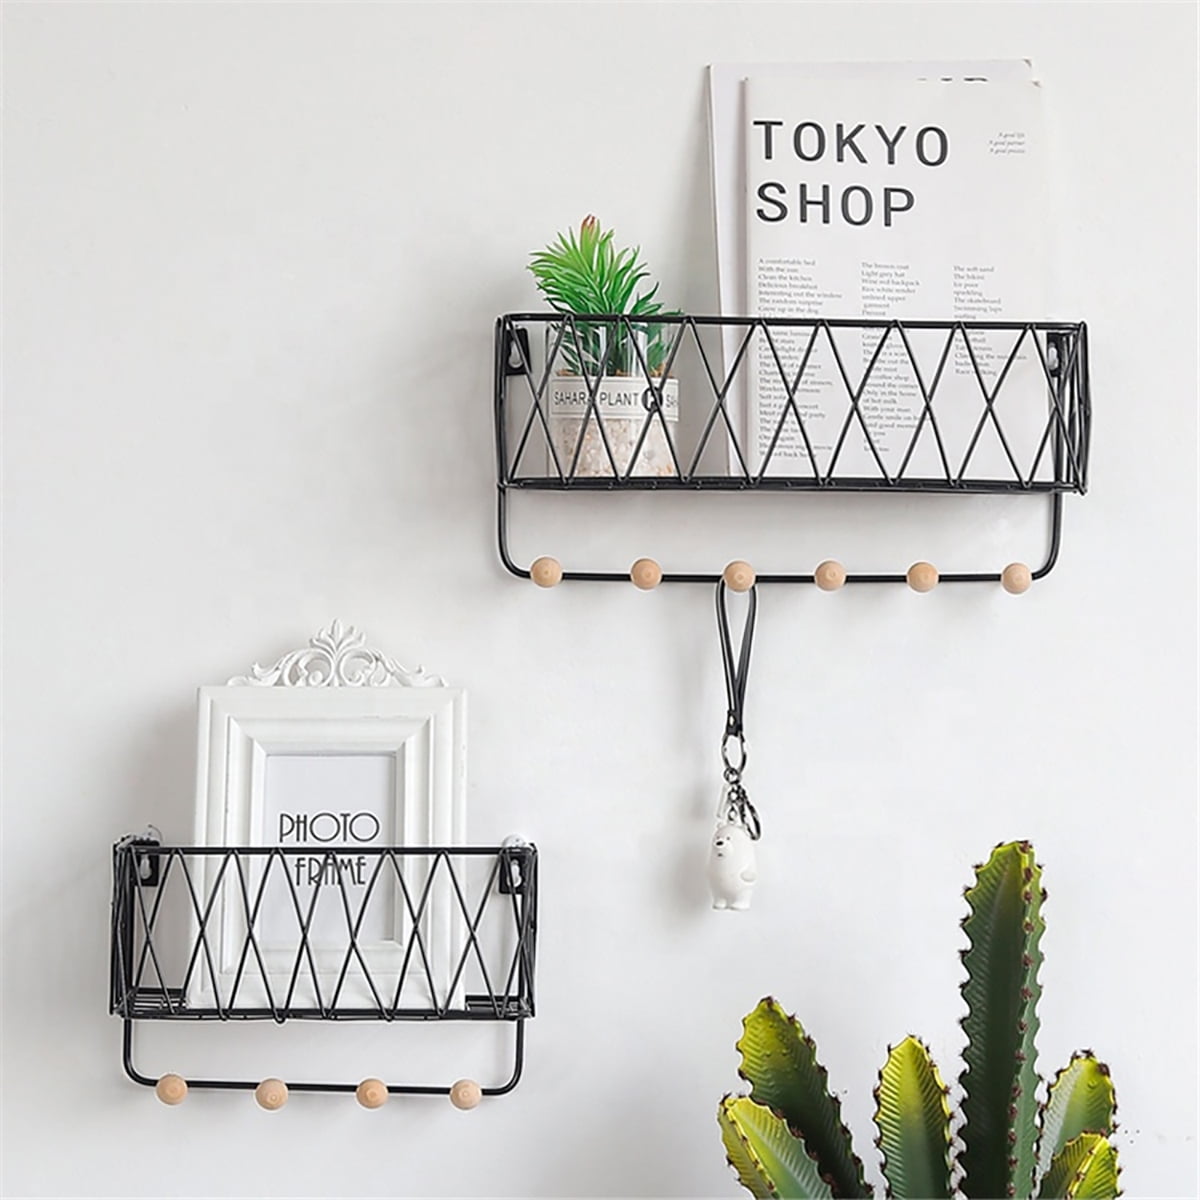 to Store and Show Off Small Collectibles 4 Shelf Figurines Mugs mDesign Round Metal Wall Mount Display Organizer Holder Black/Natural Succulent Plants 